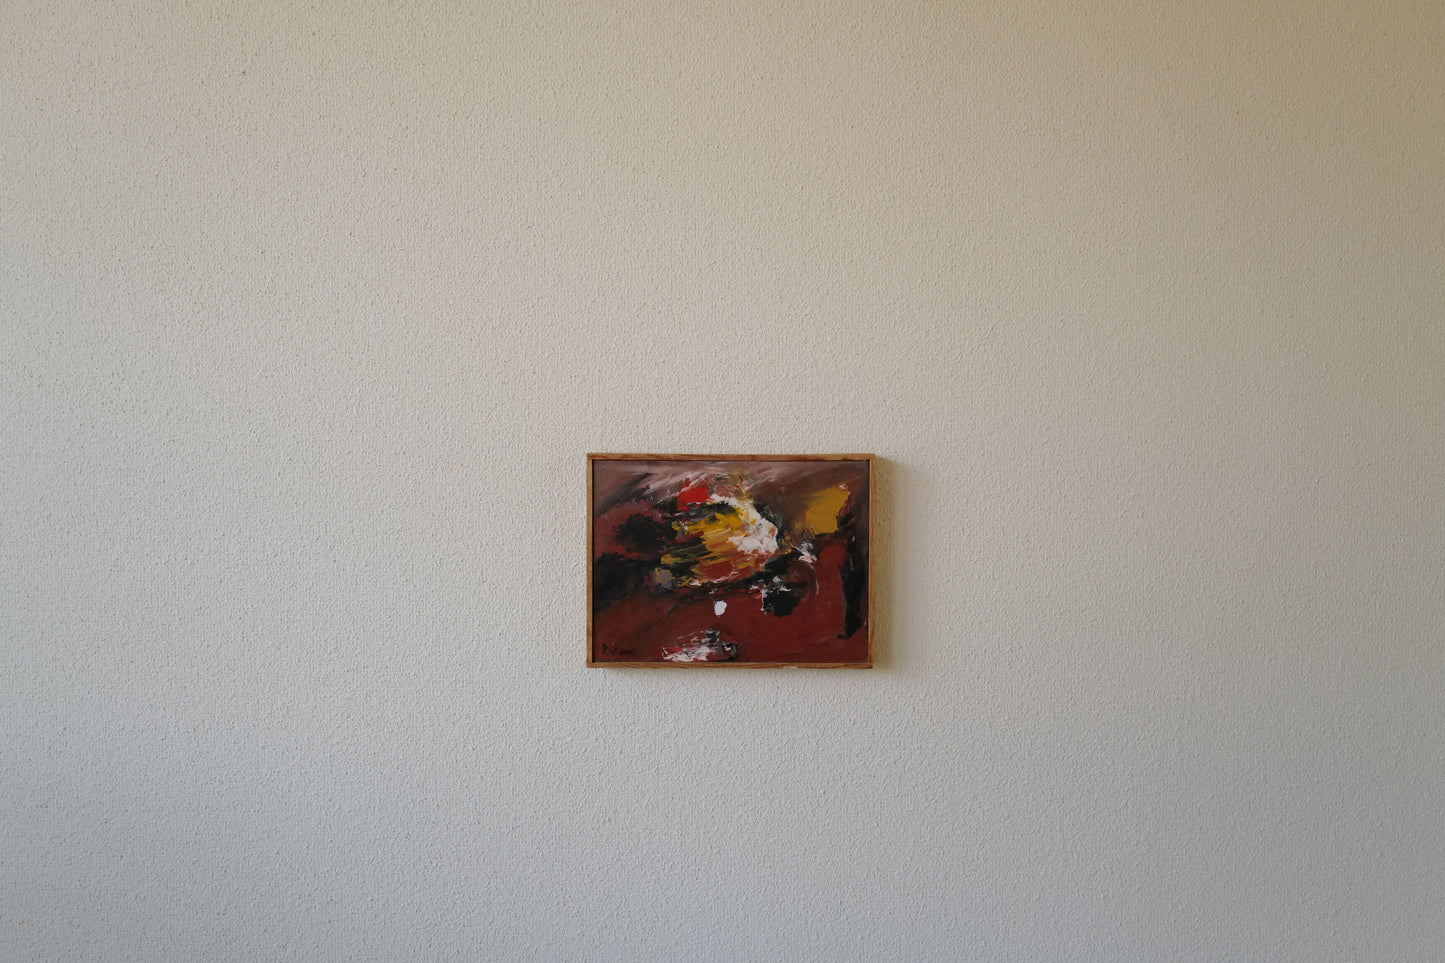 Abstract original Danish oil on plate painting from 1980 in warm bold colors titled “In Memory”